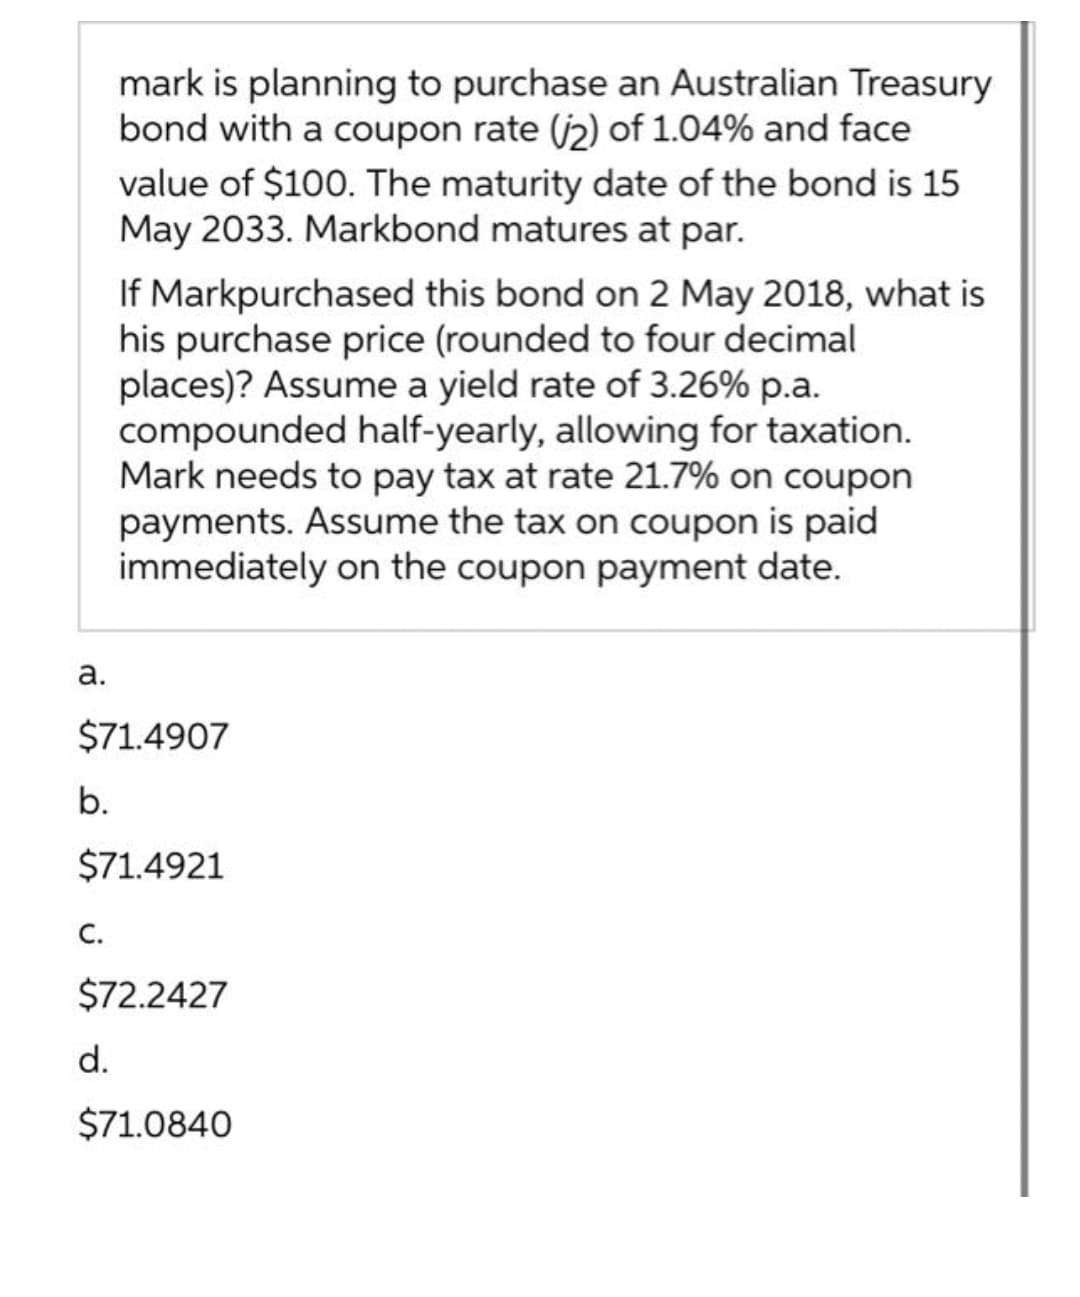 mark is planning to purchase an Australian Treasury
bond with a coupon rate (j2) of 1.04% and face
value of $100. The maturity date of the bond is 15
May 2033. Markbond matures at par.
If Markpurchased this bond on 2 May 2018, what is
his purchase price (rounded to four decimal
places)? Assume a yield rate of 3.26% p.a.
compounded half-yearly, allowing for taxation.
Mark needs to pay tax at rate 21.7% on coupon
payments. Assume the tax on coupon is paid
immediately on the coupon payment date.
а.
$71.4907
b.
$71.4921
С.
$72.2427
d.
$71.0840
